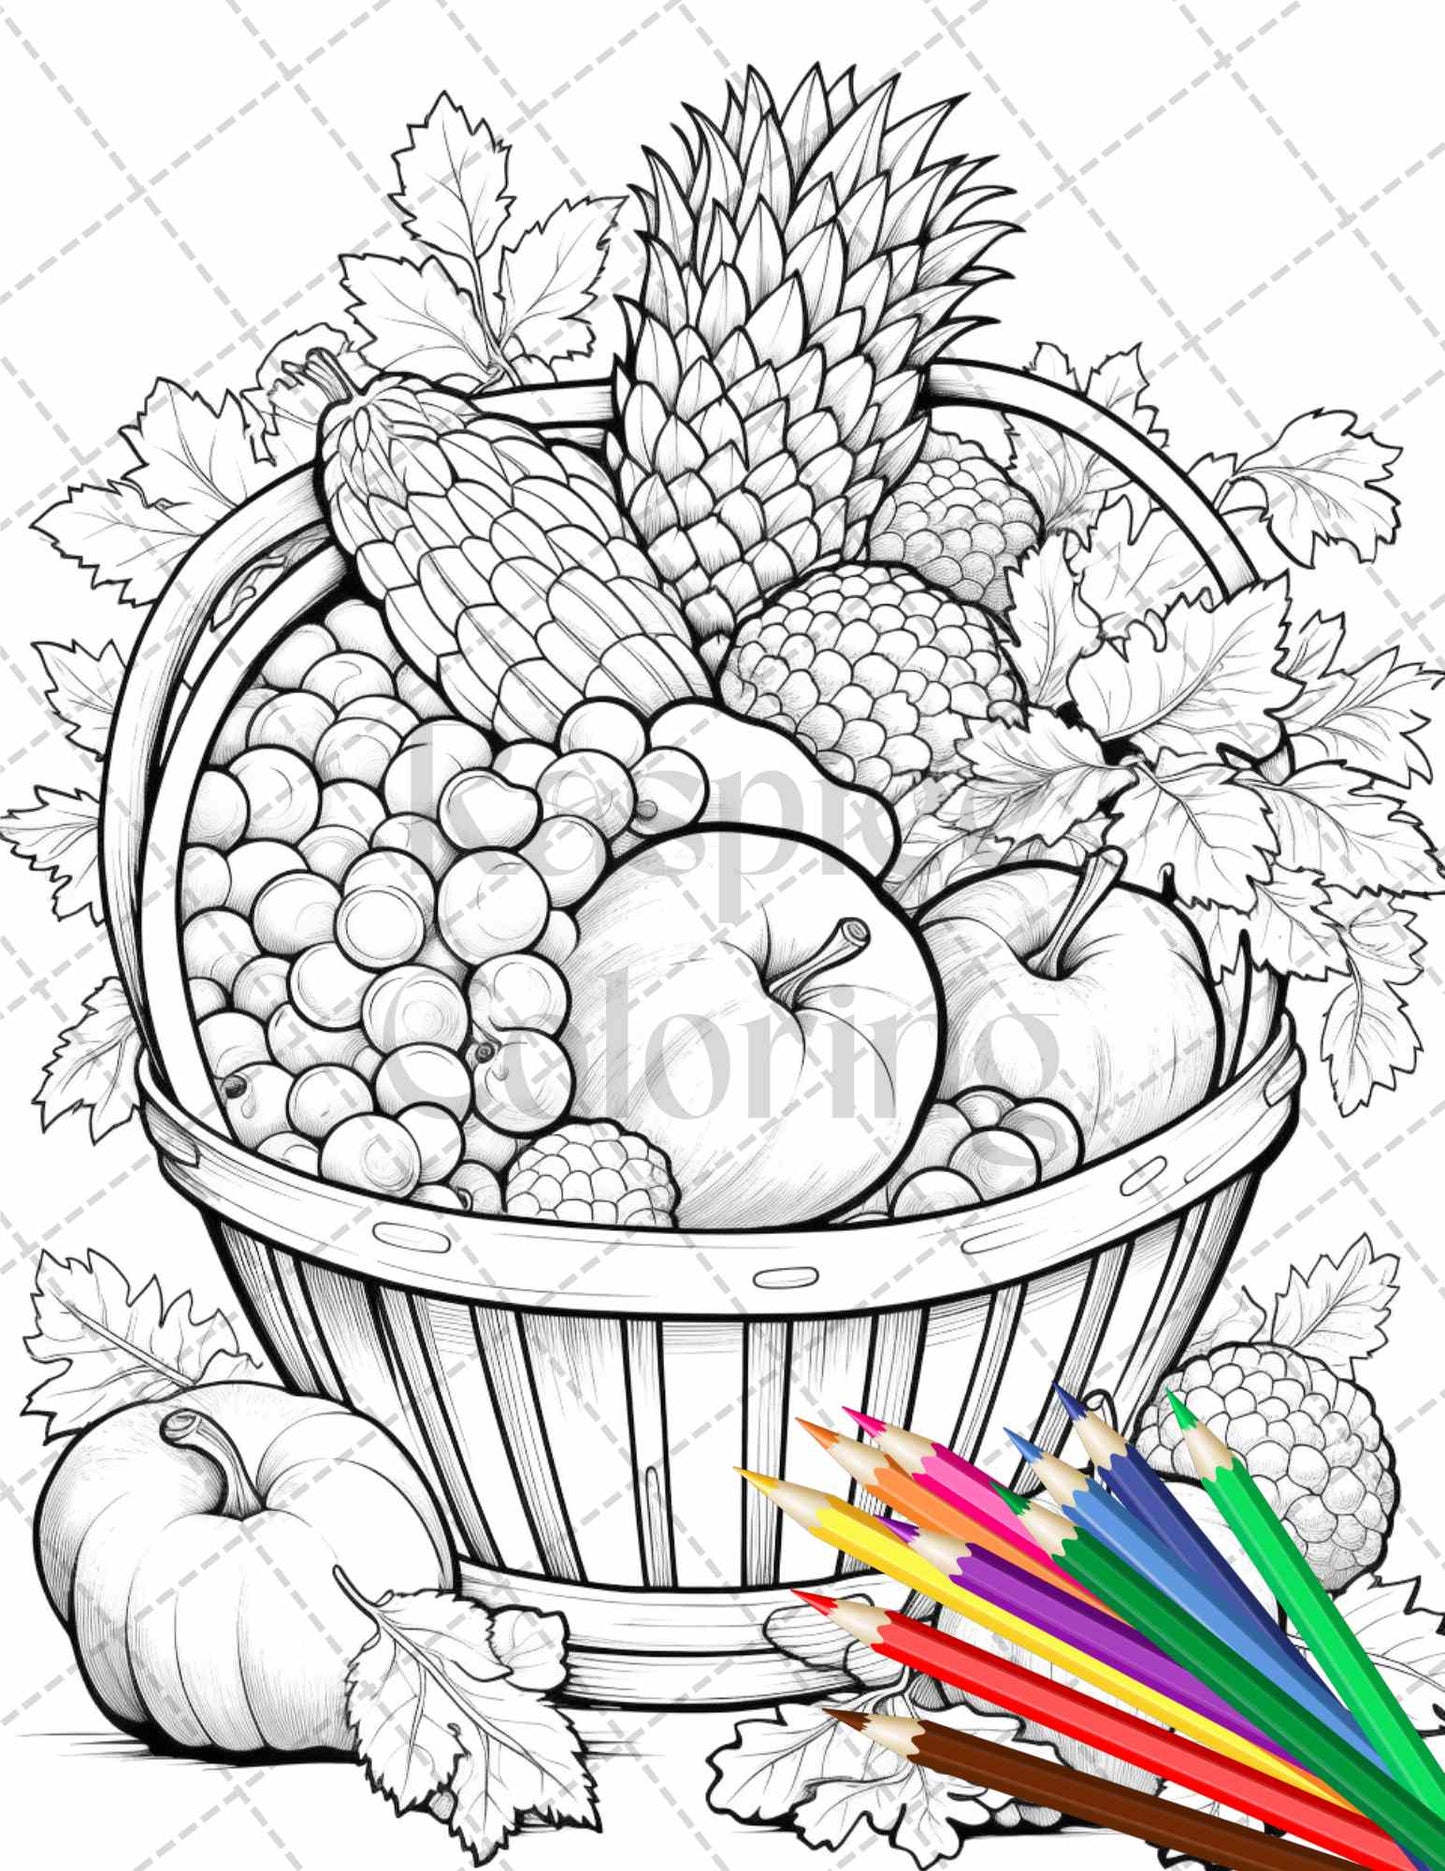 Autumn Harvest Grayscale Coloring Page for Adults, Fall-Themed Printable Coloring Art for Stress Relief, Autumn Coloring Pages for Adults, Fall Coloring Pages for Adults